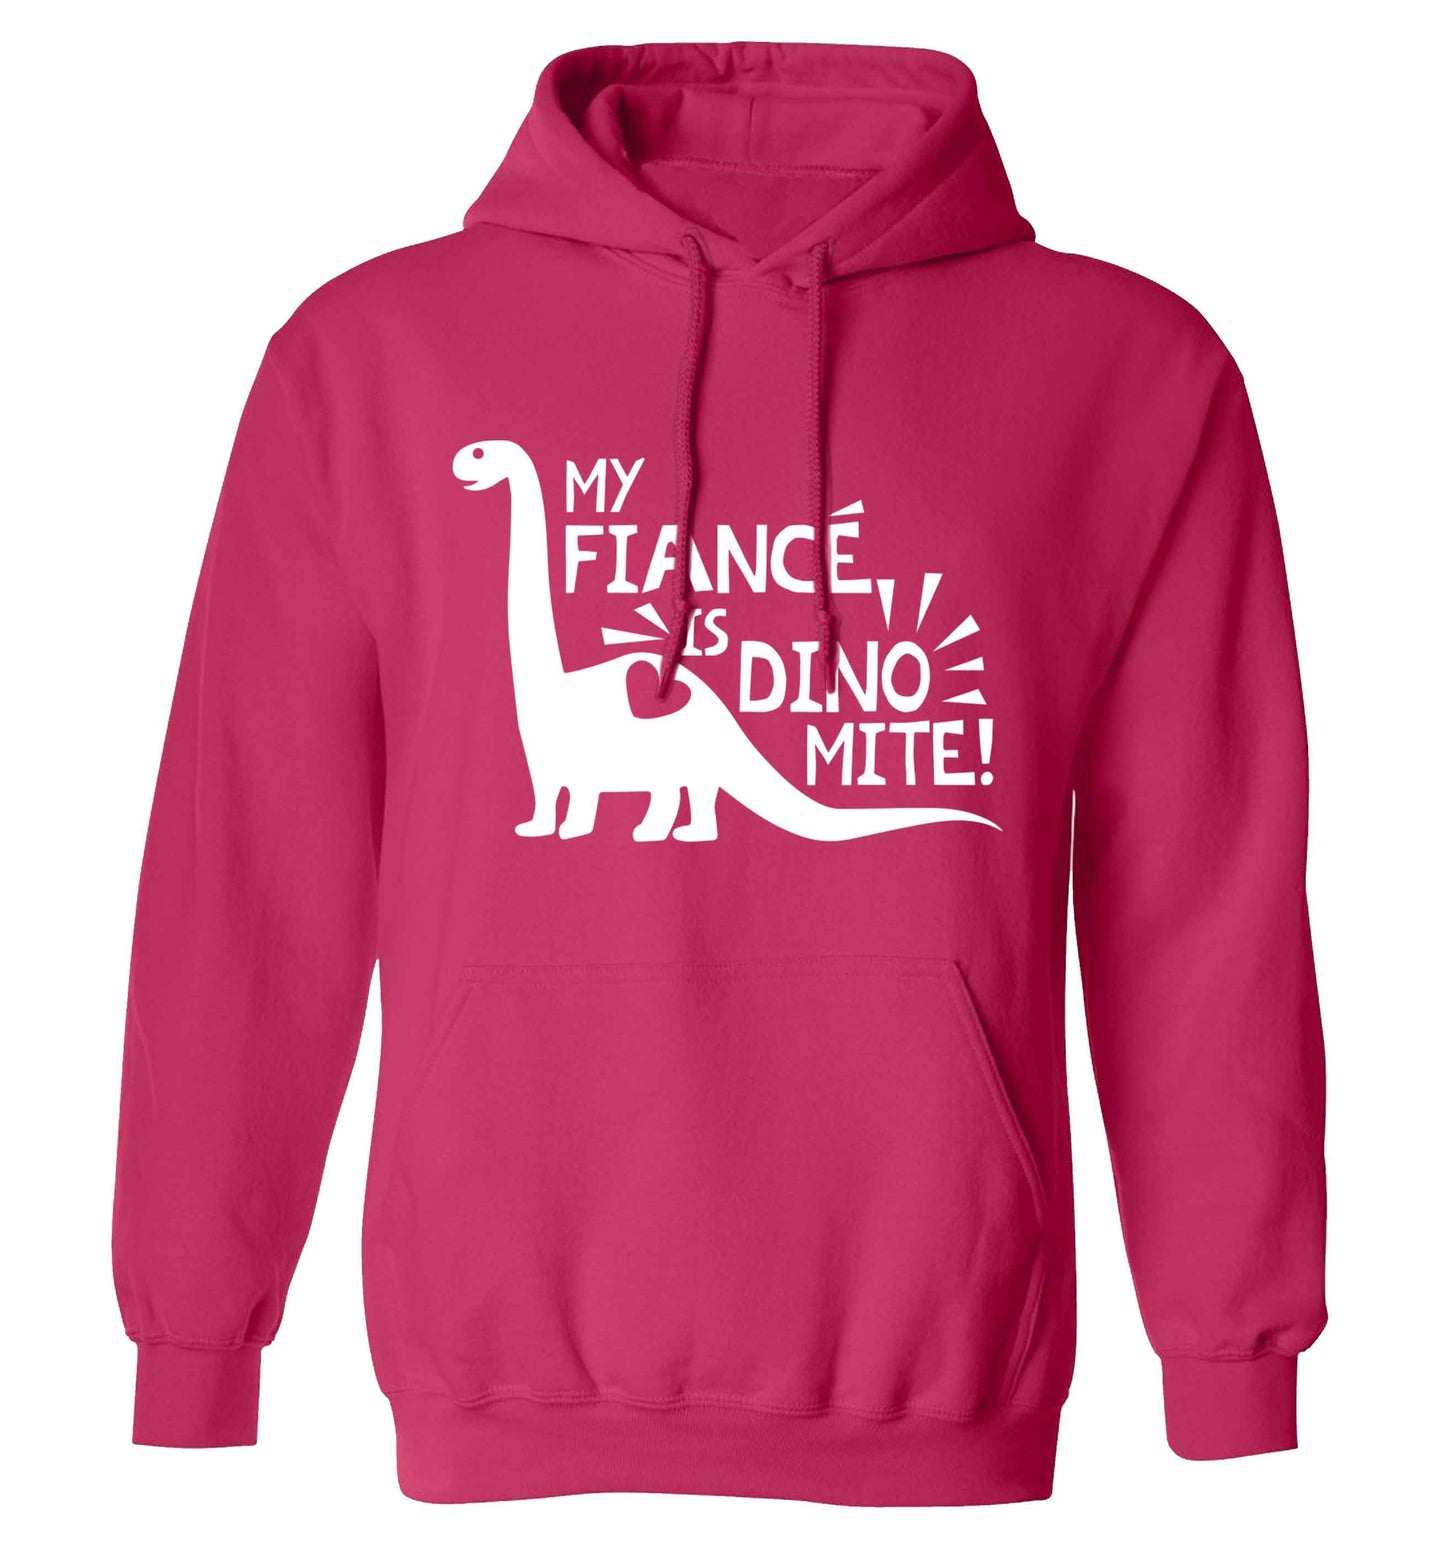 My fiance is dinomite! adults unisex pink hoodie 2XL